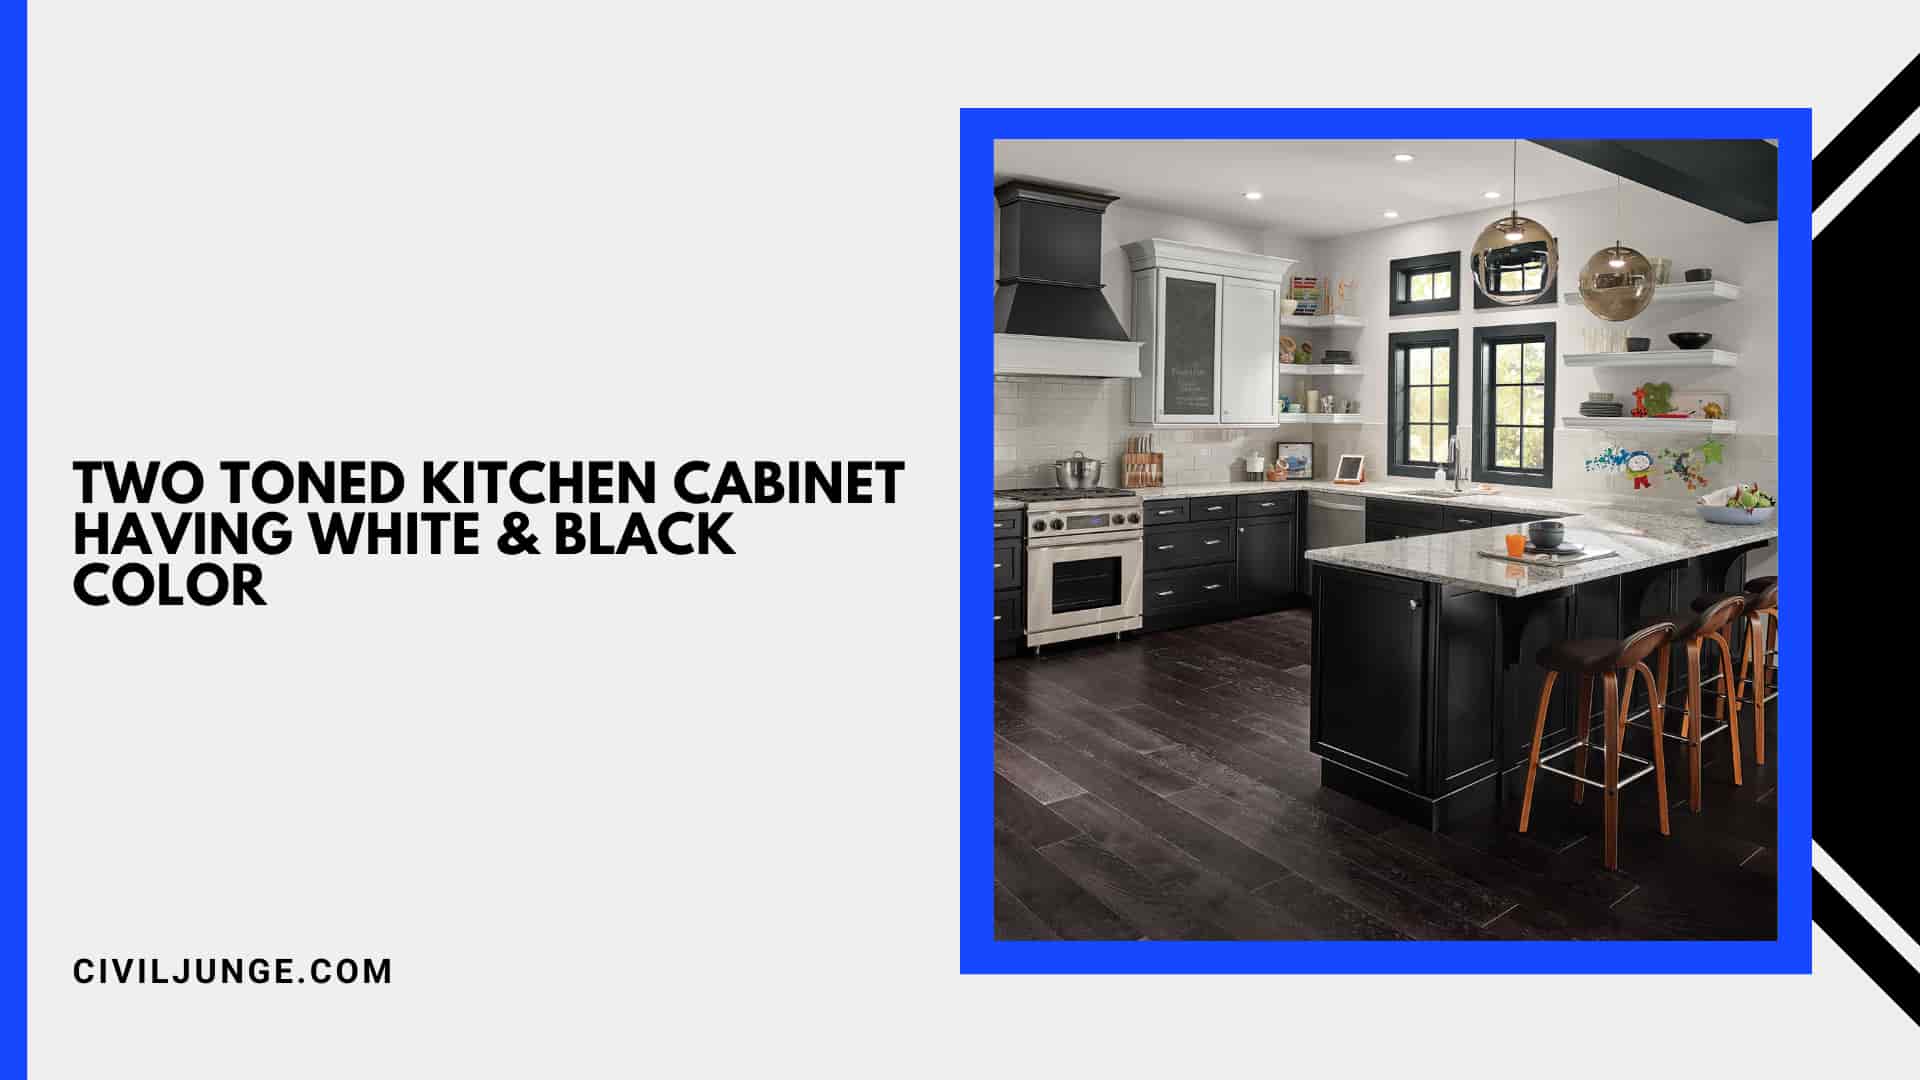 Two Toned Kitchen Cabinet Having White & Black Color